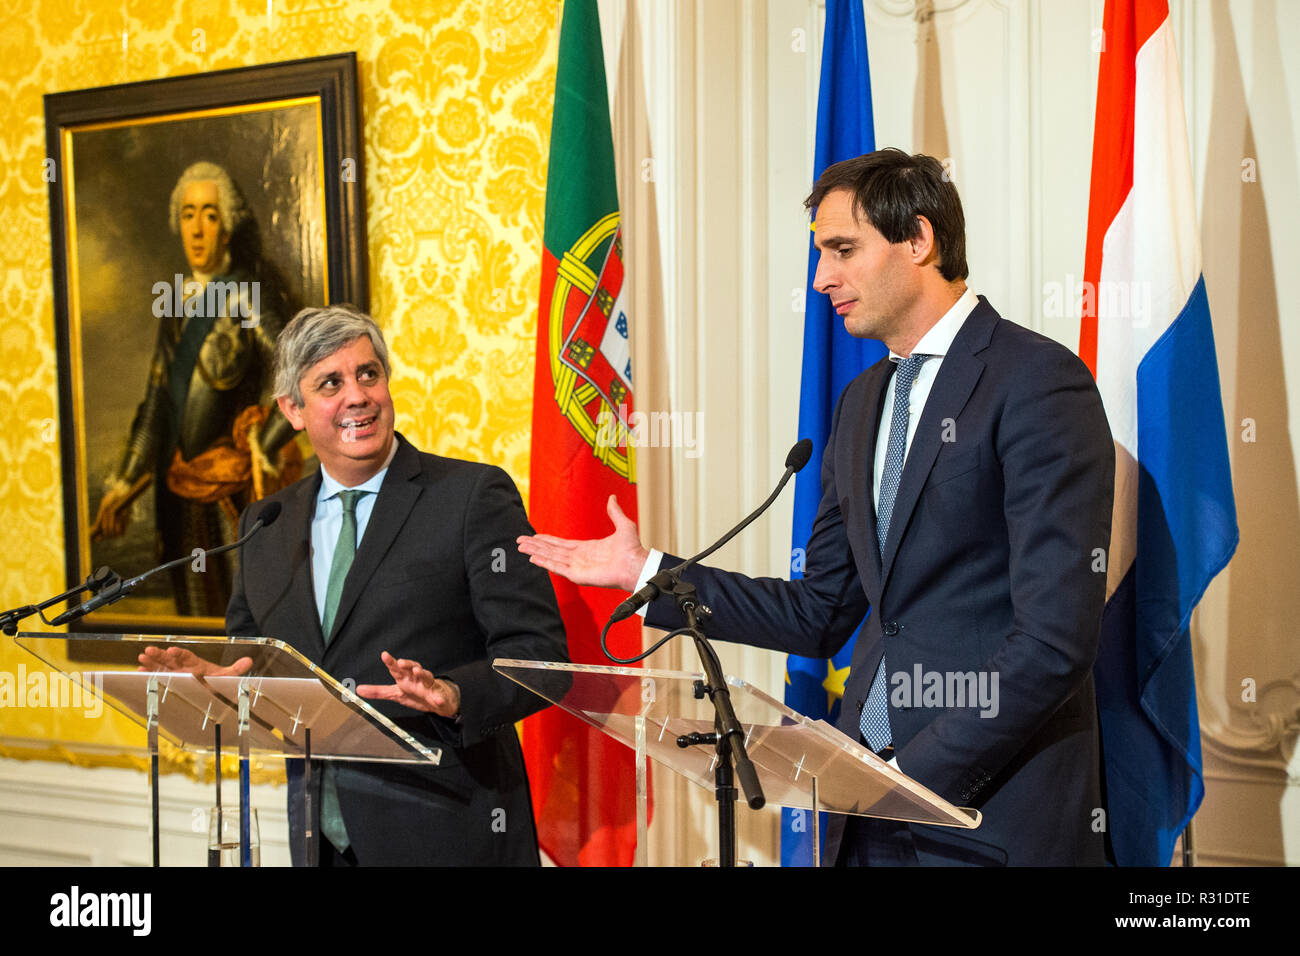 The Hague, Netherlands. 21st Nov 2018. EuroGroup President Mario Centeno visit The Hague to meet Finance Minister Wopke Hoekstra. Discussion topic is to strengthen the euro zone, for example through a larger role for the ESM bailout fund. Credit: Gonçalo Silva/Alamy Live News Stock Photo